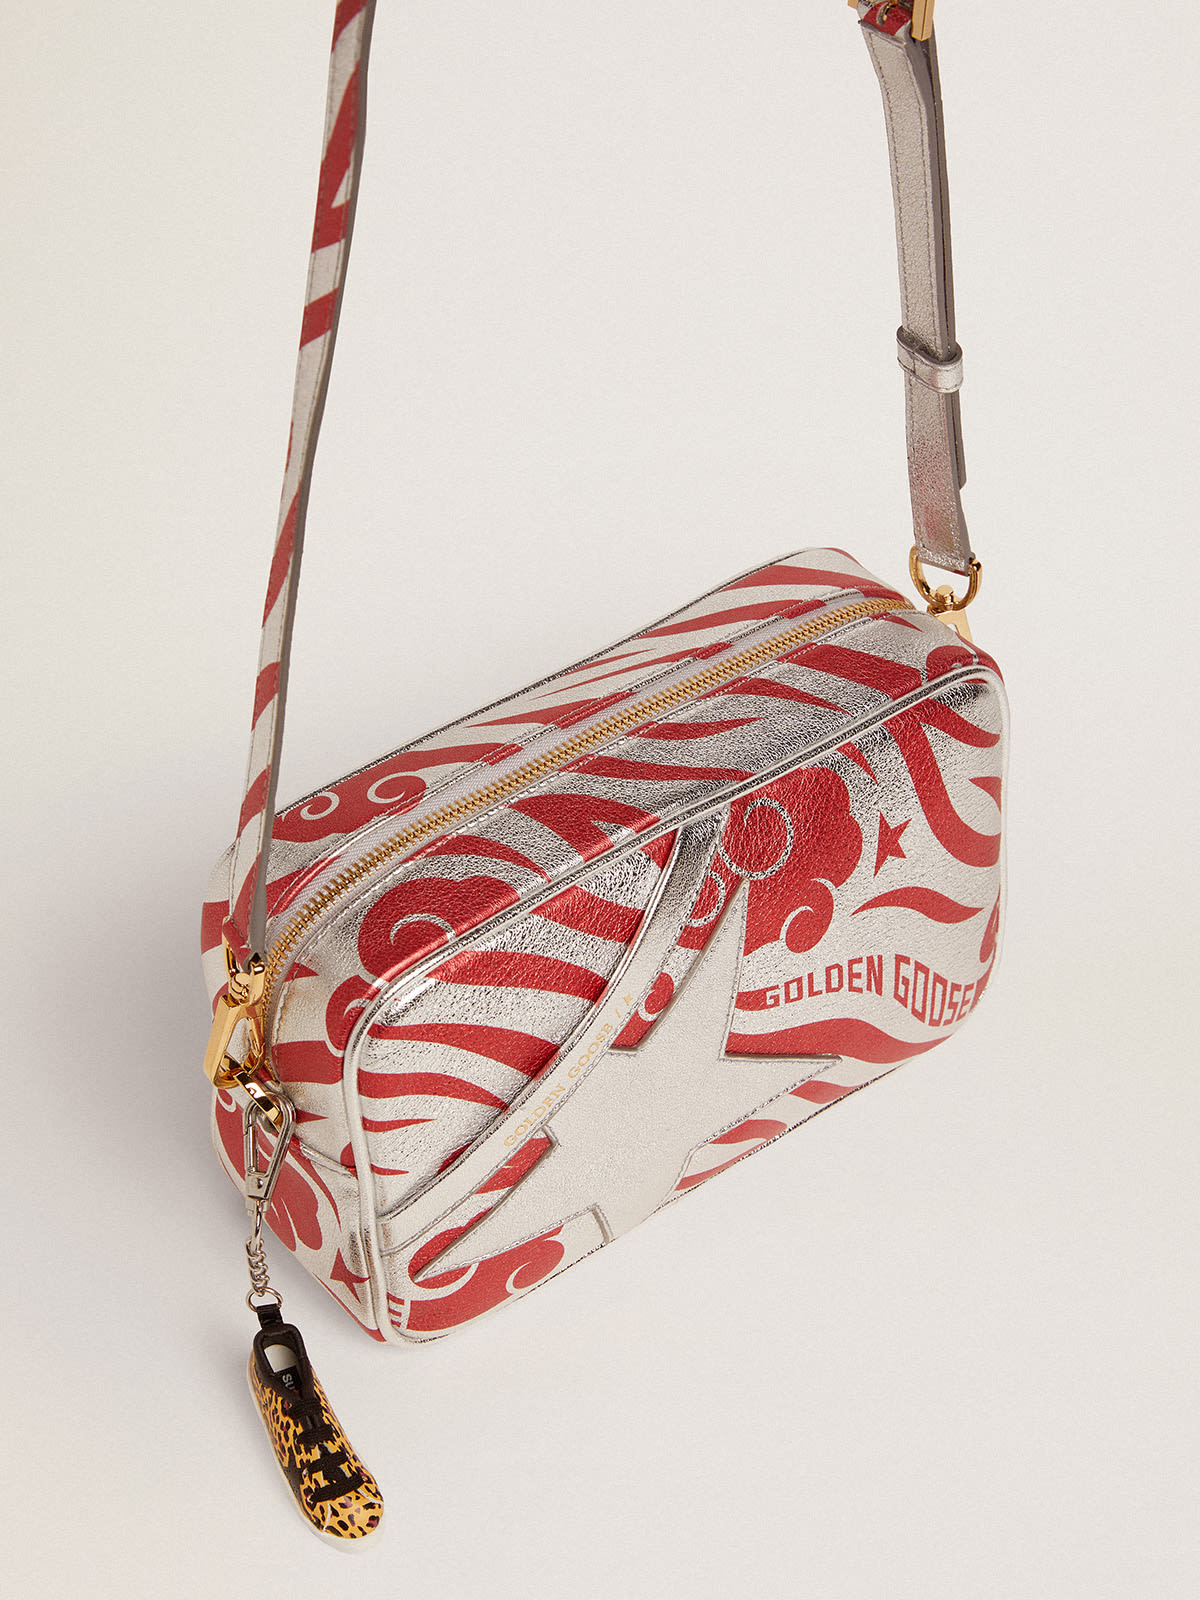 Golden Goose - Star Bag in silver-colored laminated leather with tone-on-tone star and red tiger-striped CNY print in 